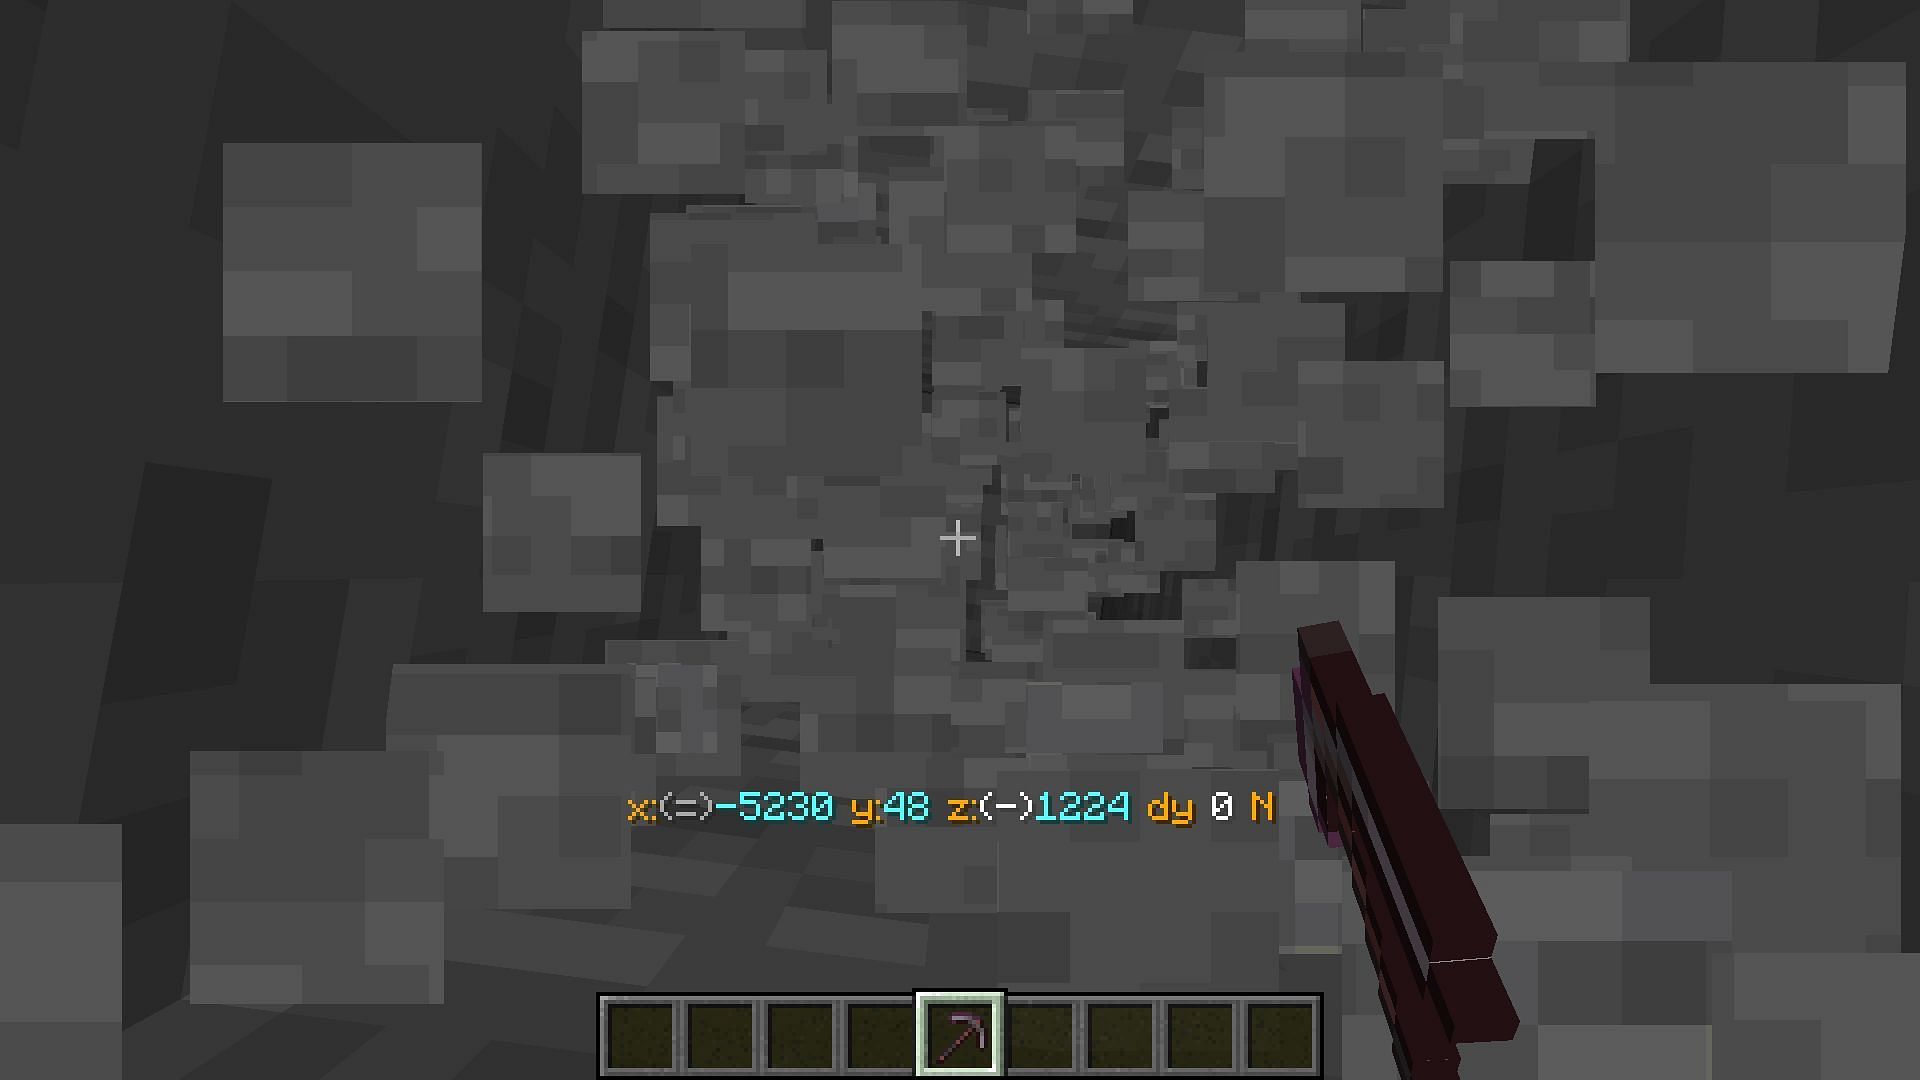 Auto-clicker speeds up and automates the mining process in Minecraft (Image via Mojang)